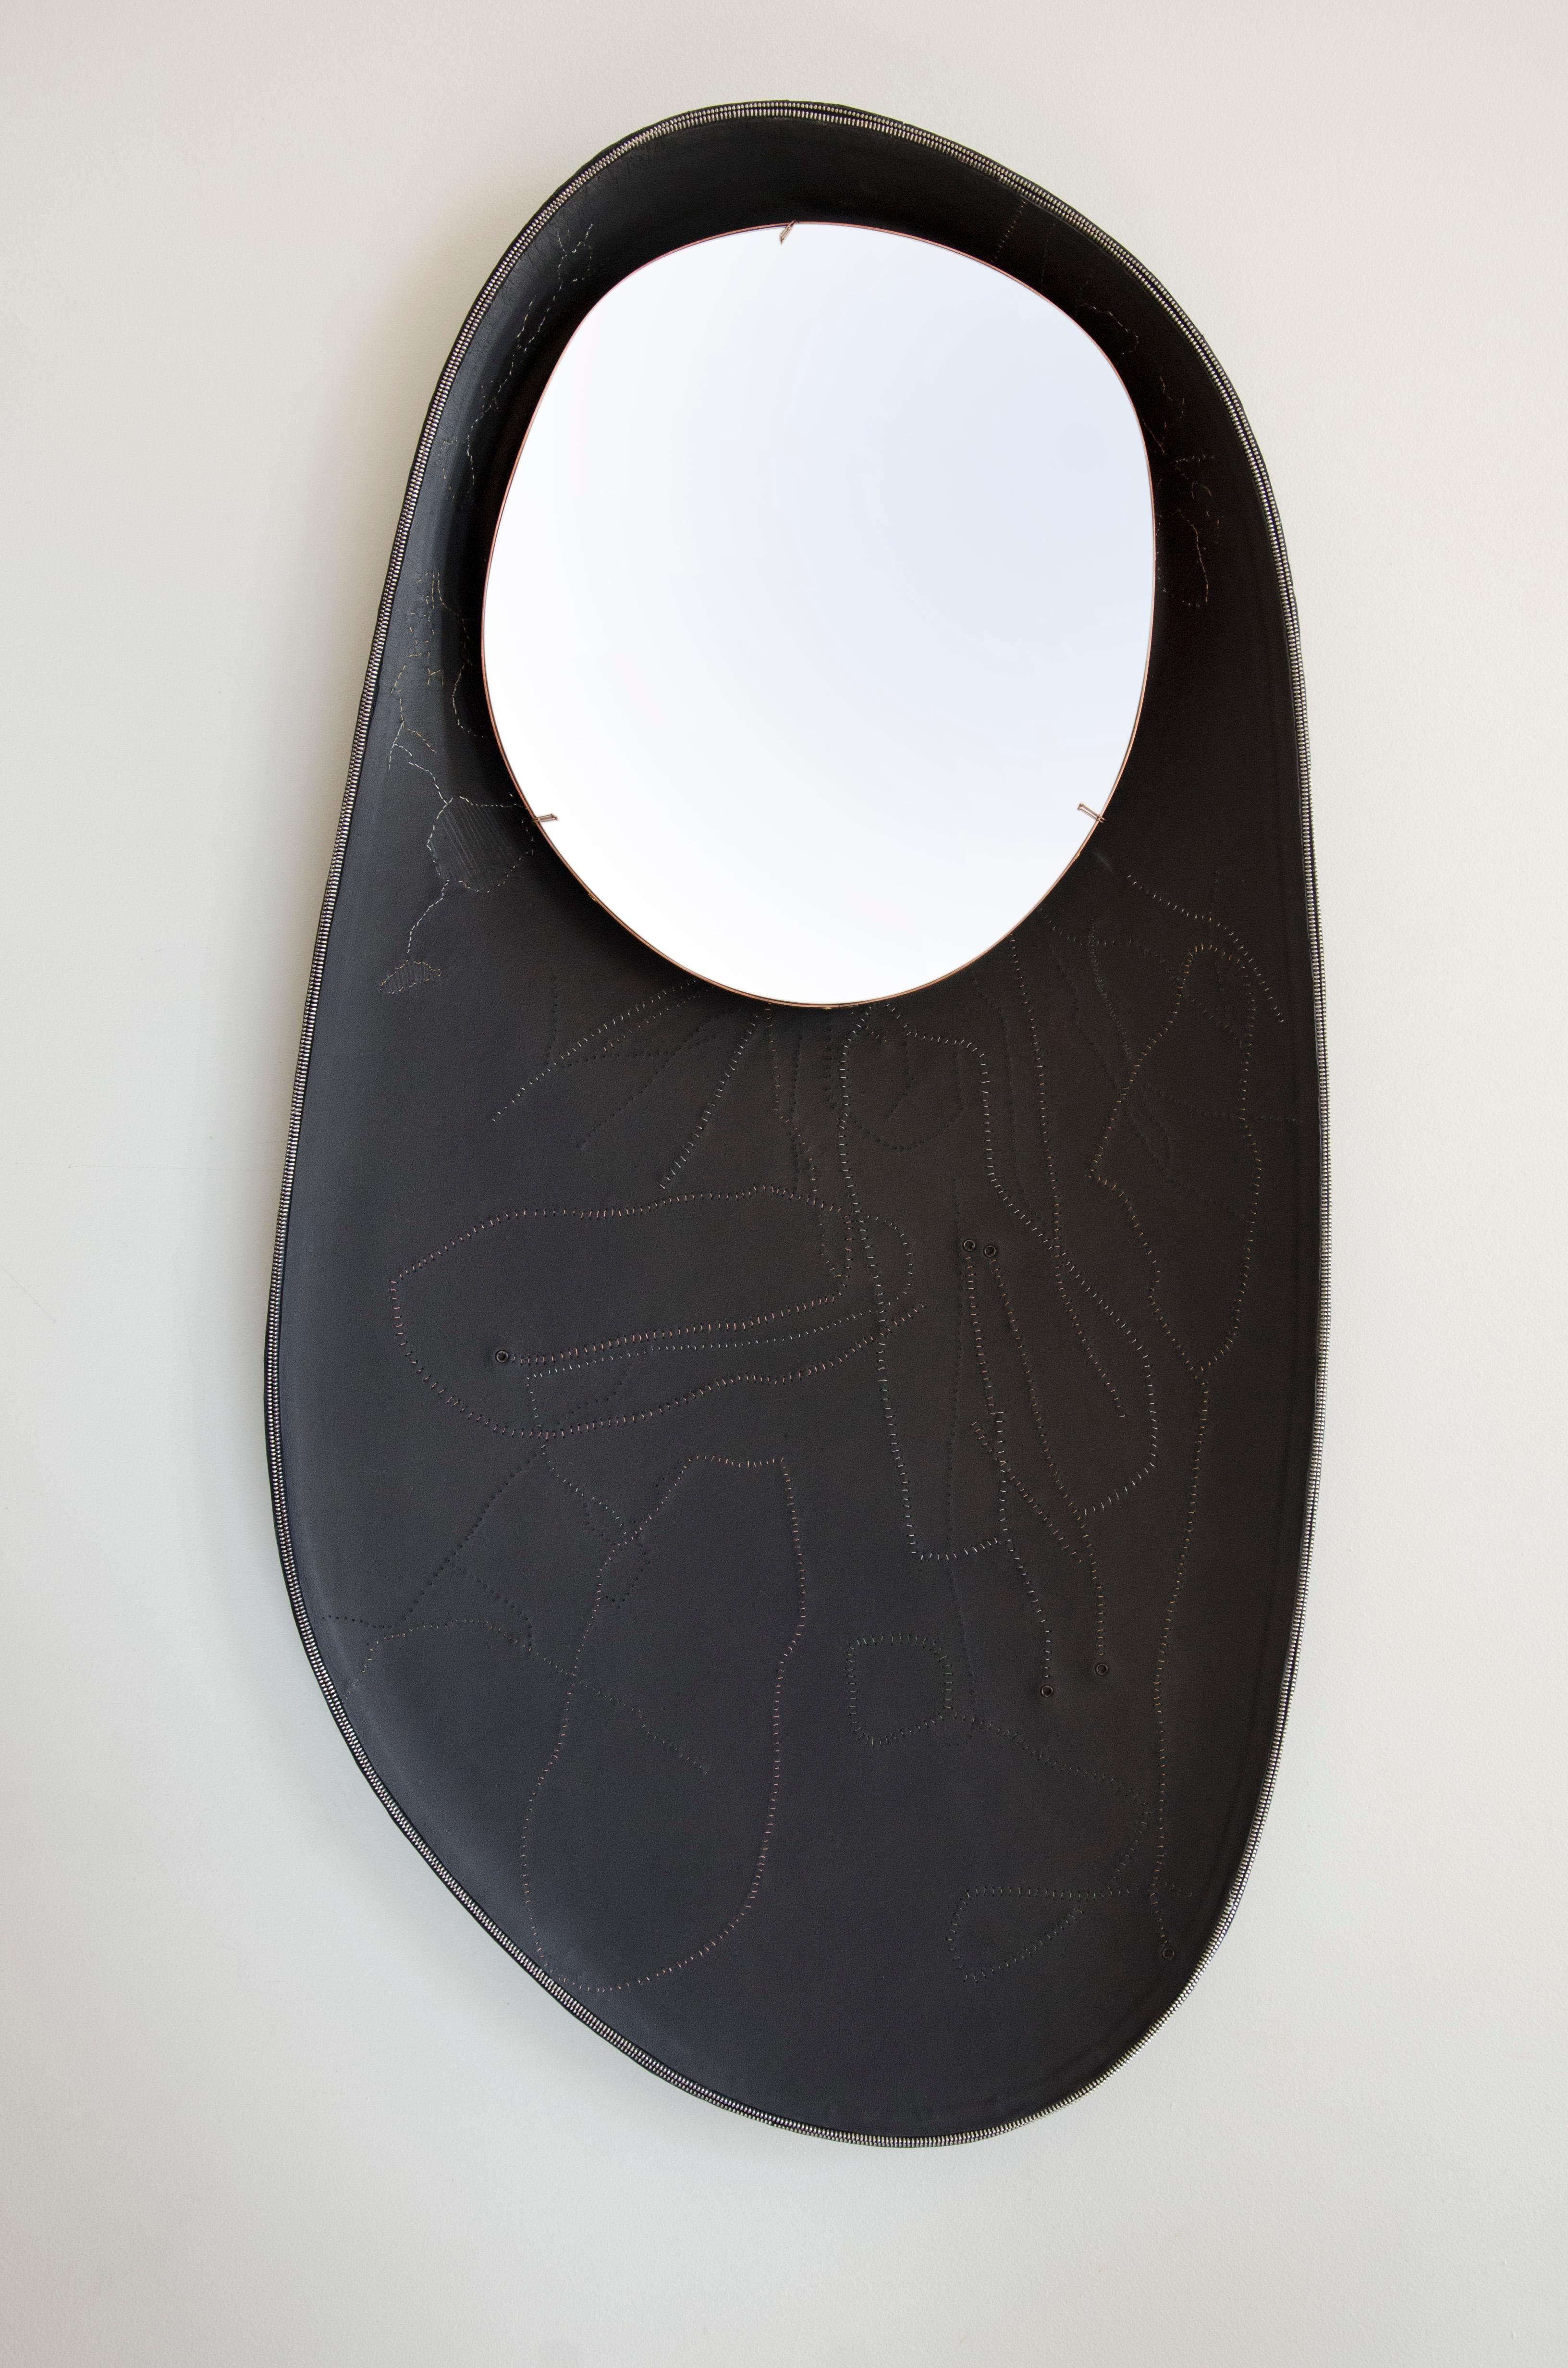 Embossed Black Leather Mirror with Gold, Silver and Copper Embroidery, France